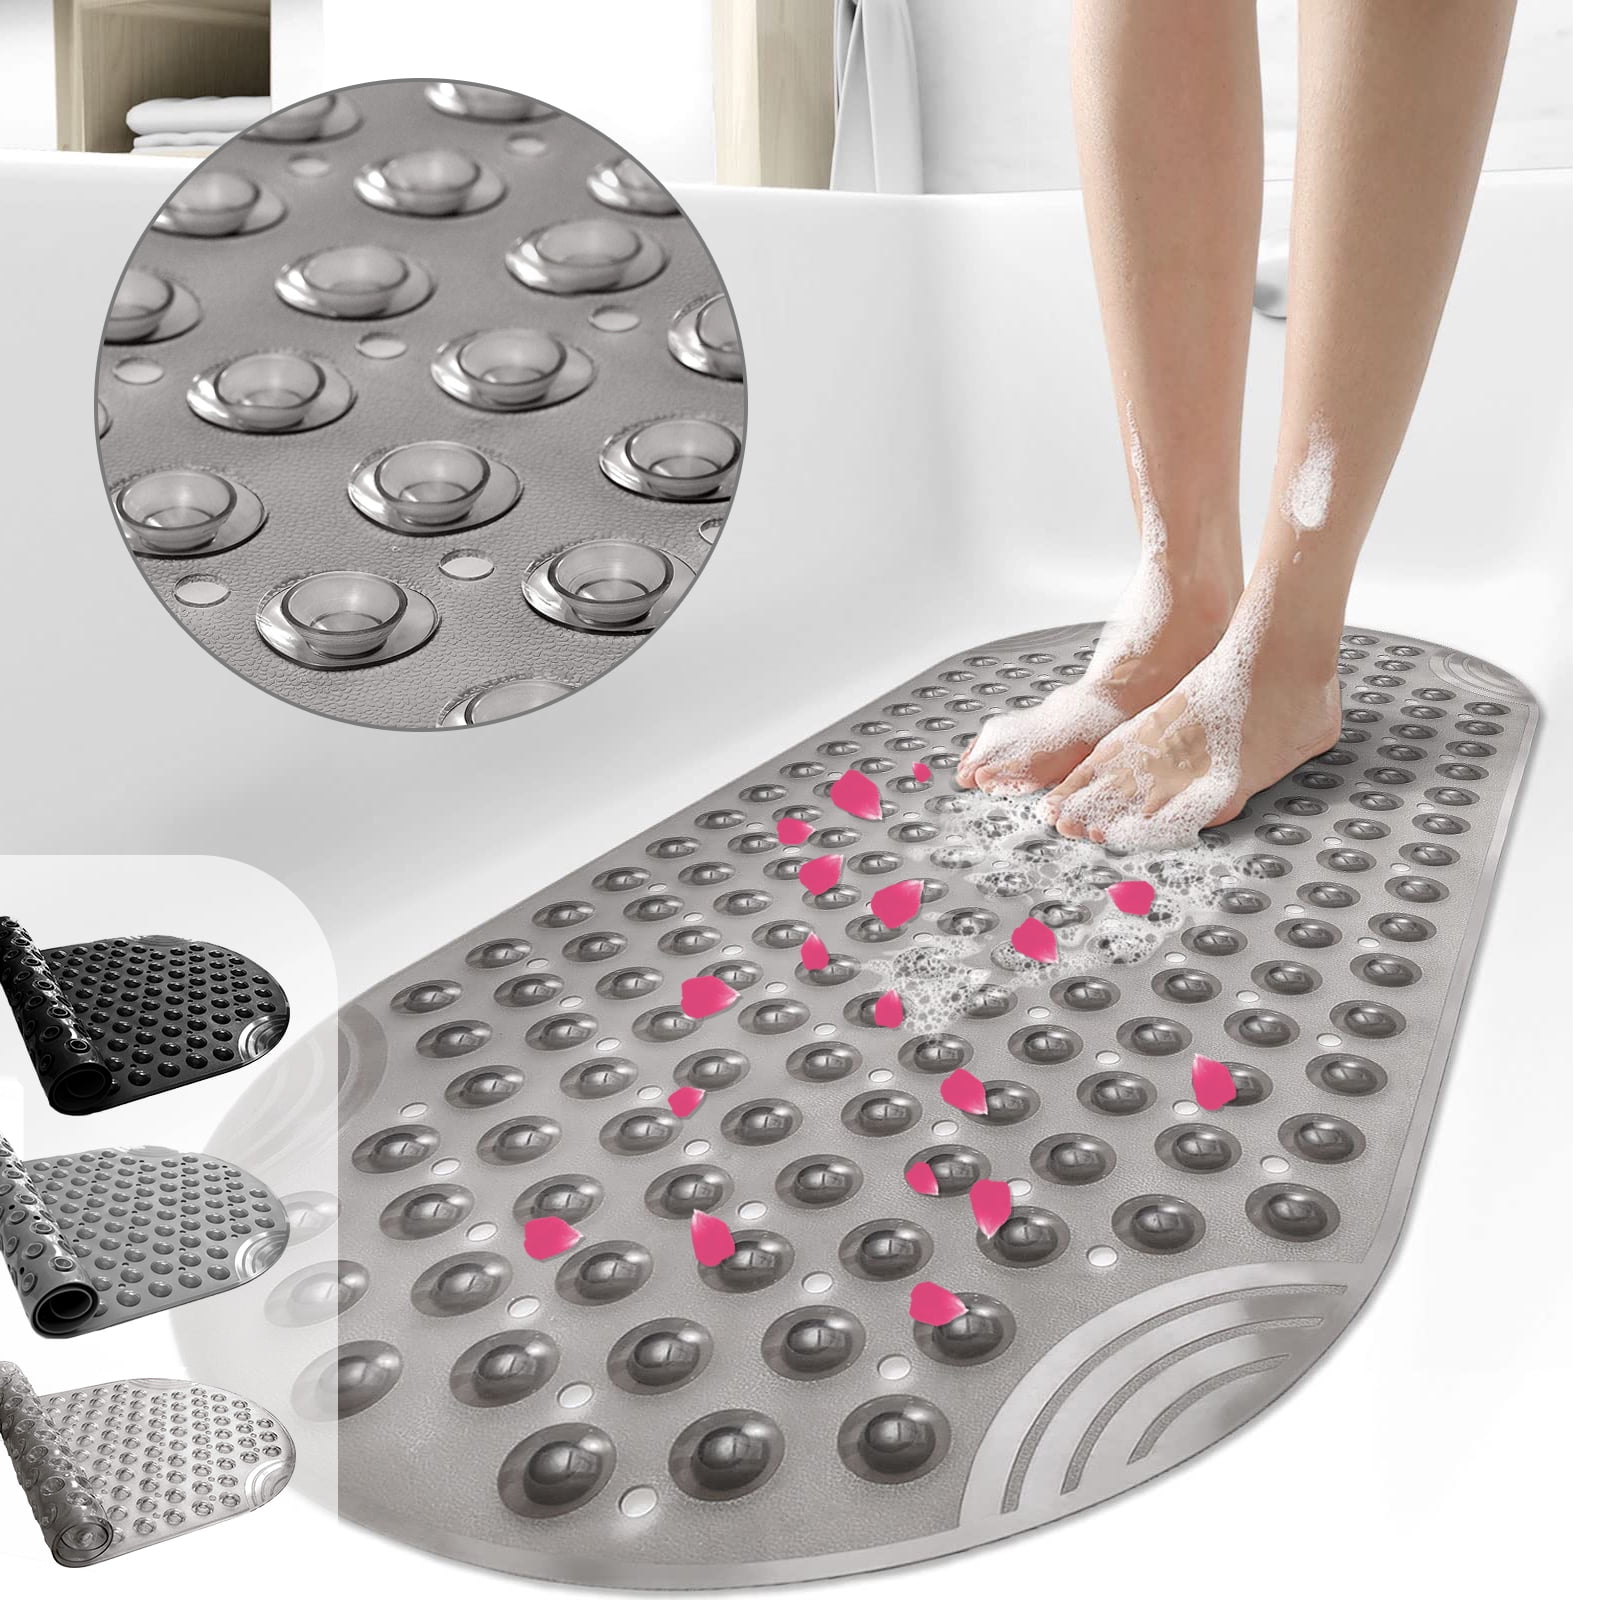 OLANLY Shower Mat Non Slip, 27.5x15.5 Bathtub Mats, Machine Washable Bath  Mat for Tub with Drain Holes and Suction Cups to Keep Floor Clean, Soft on